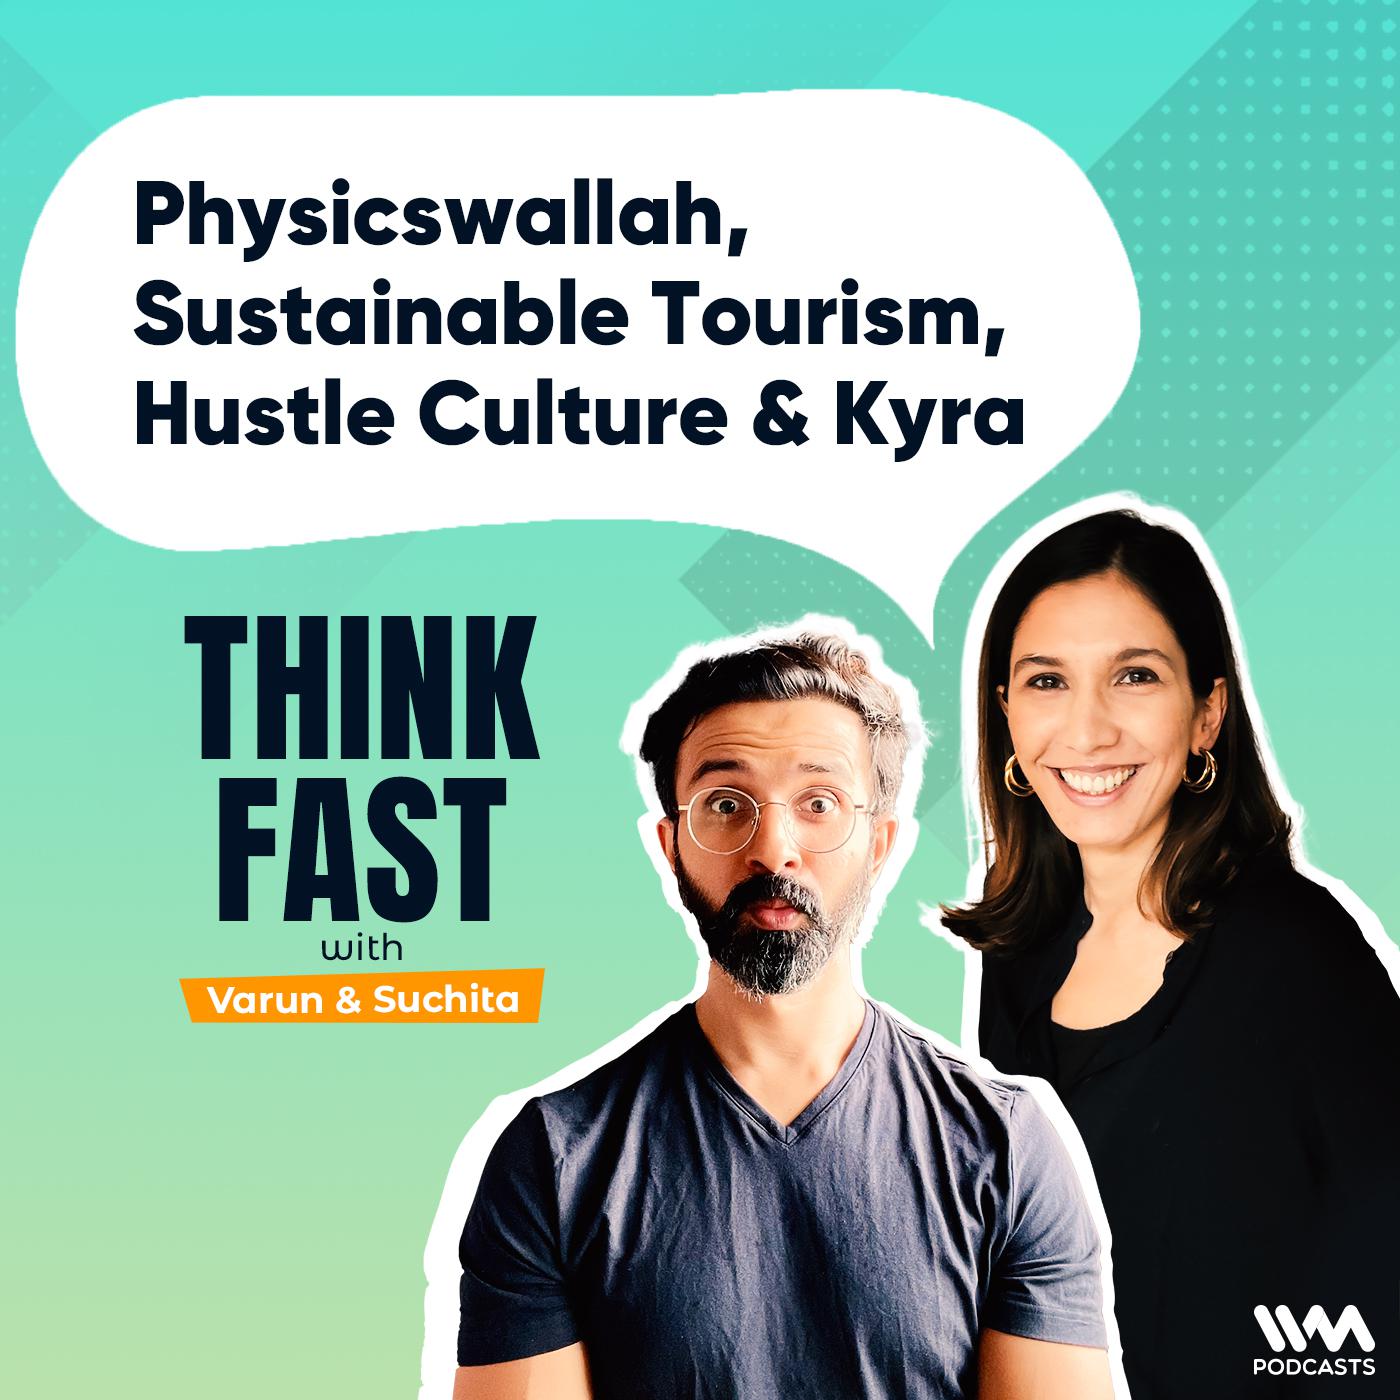 Physicswallah, Sustainable Tourism, Hustle Culture & Kyra